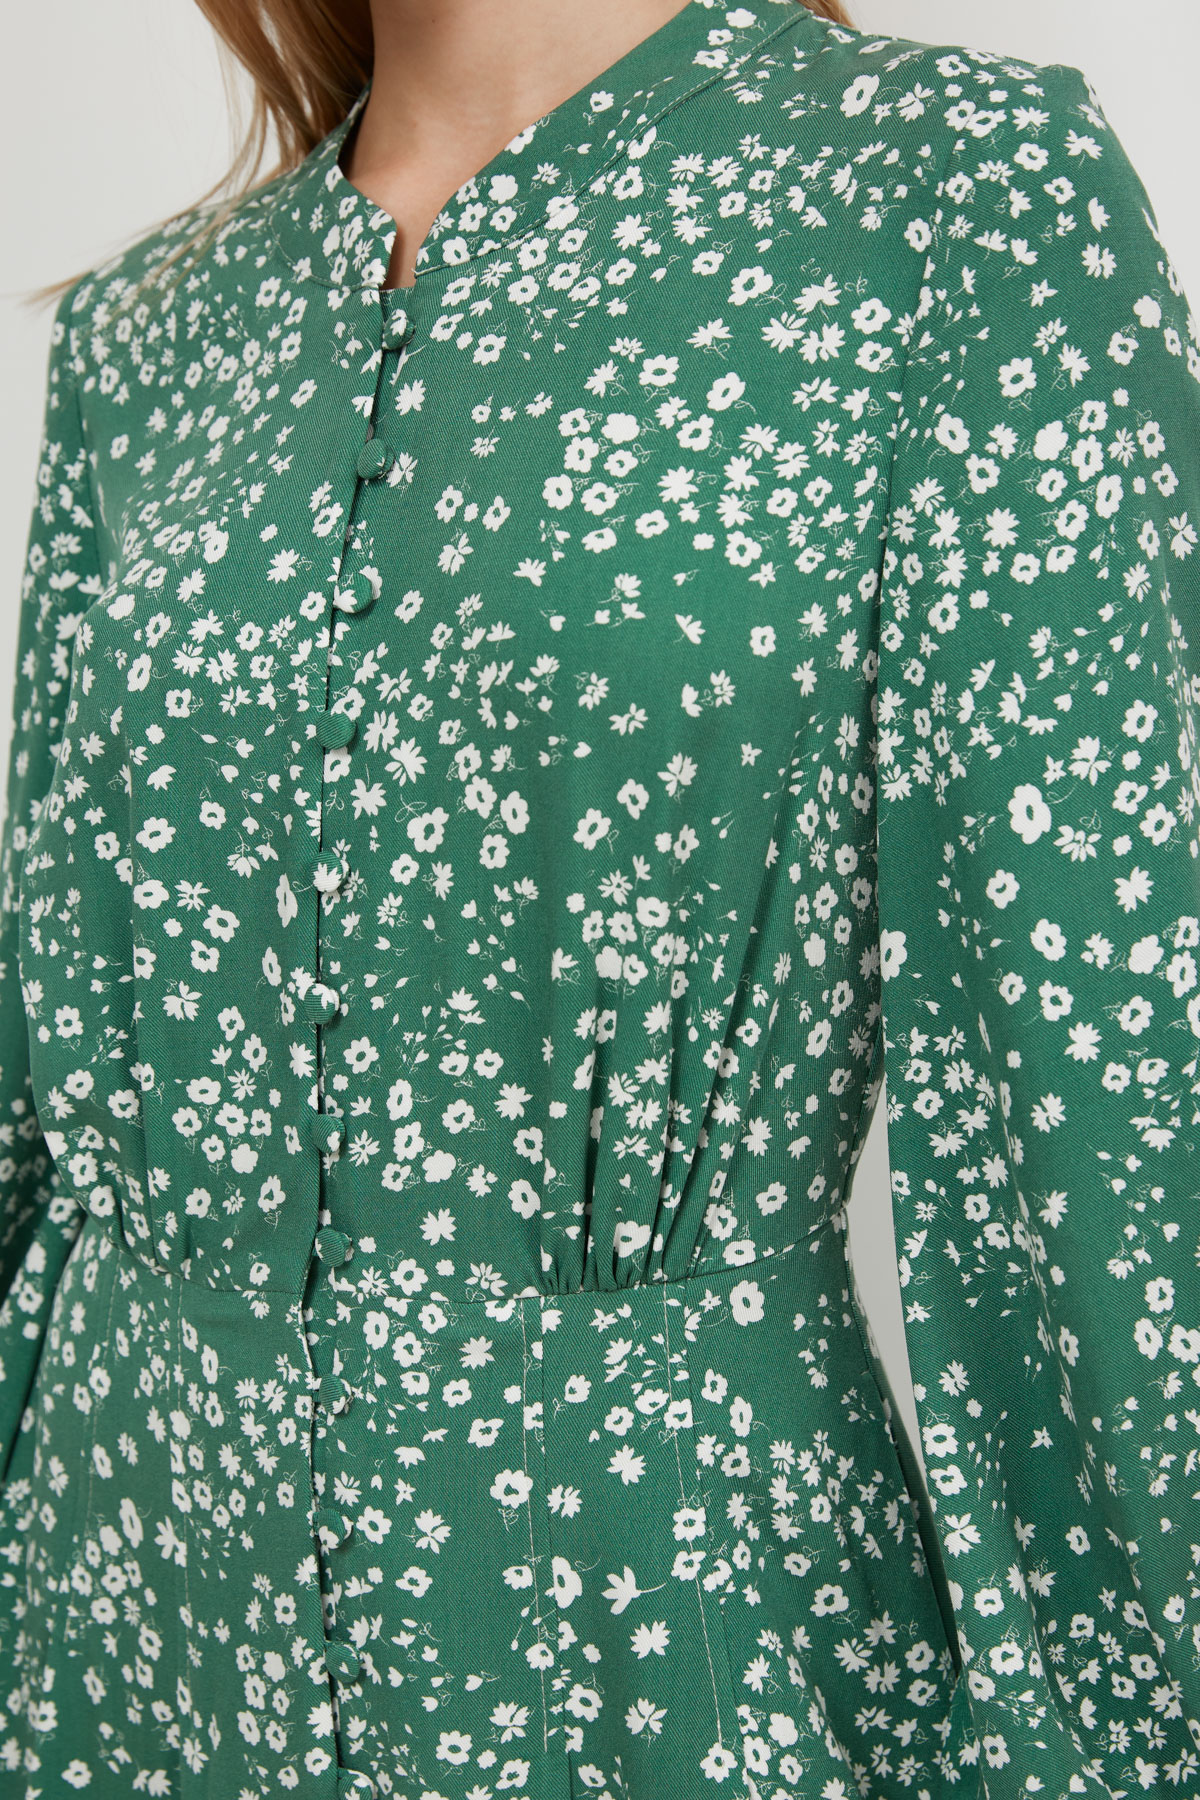 Midi dress with viscose green in flowers print, photo 3